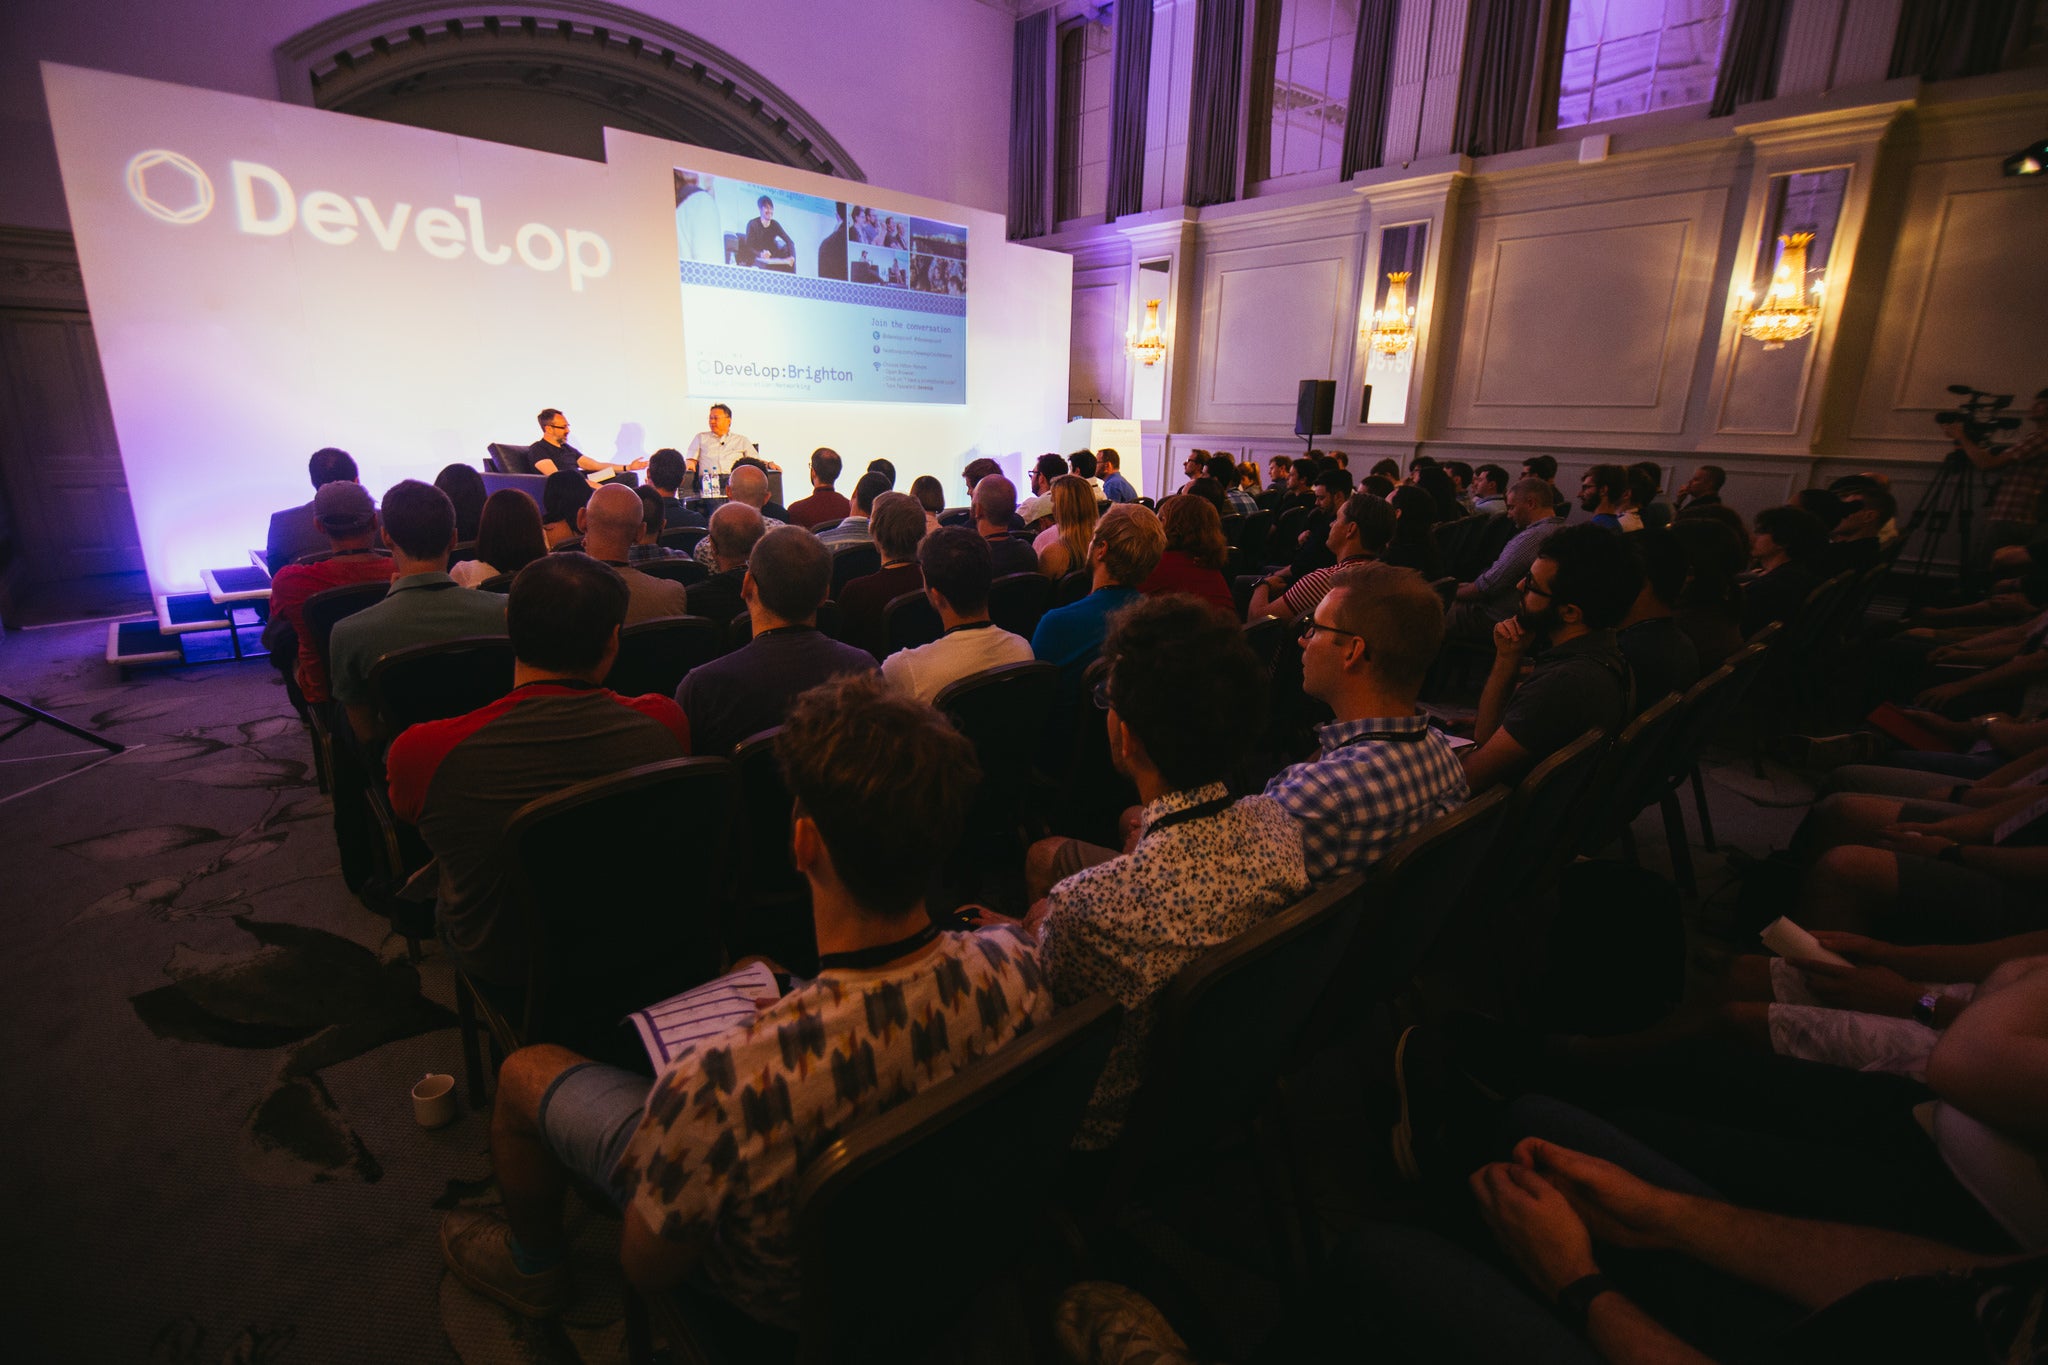 Image for BioWare, Riot Games and Ubisoft headline initial speaker line-up for Develop:Brighton